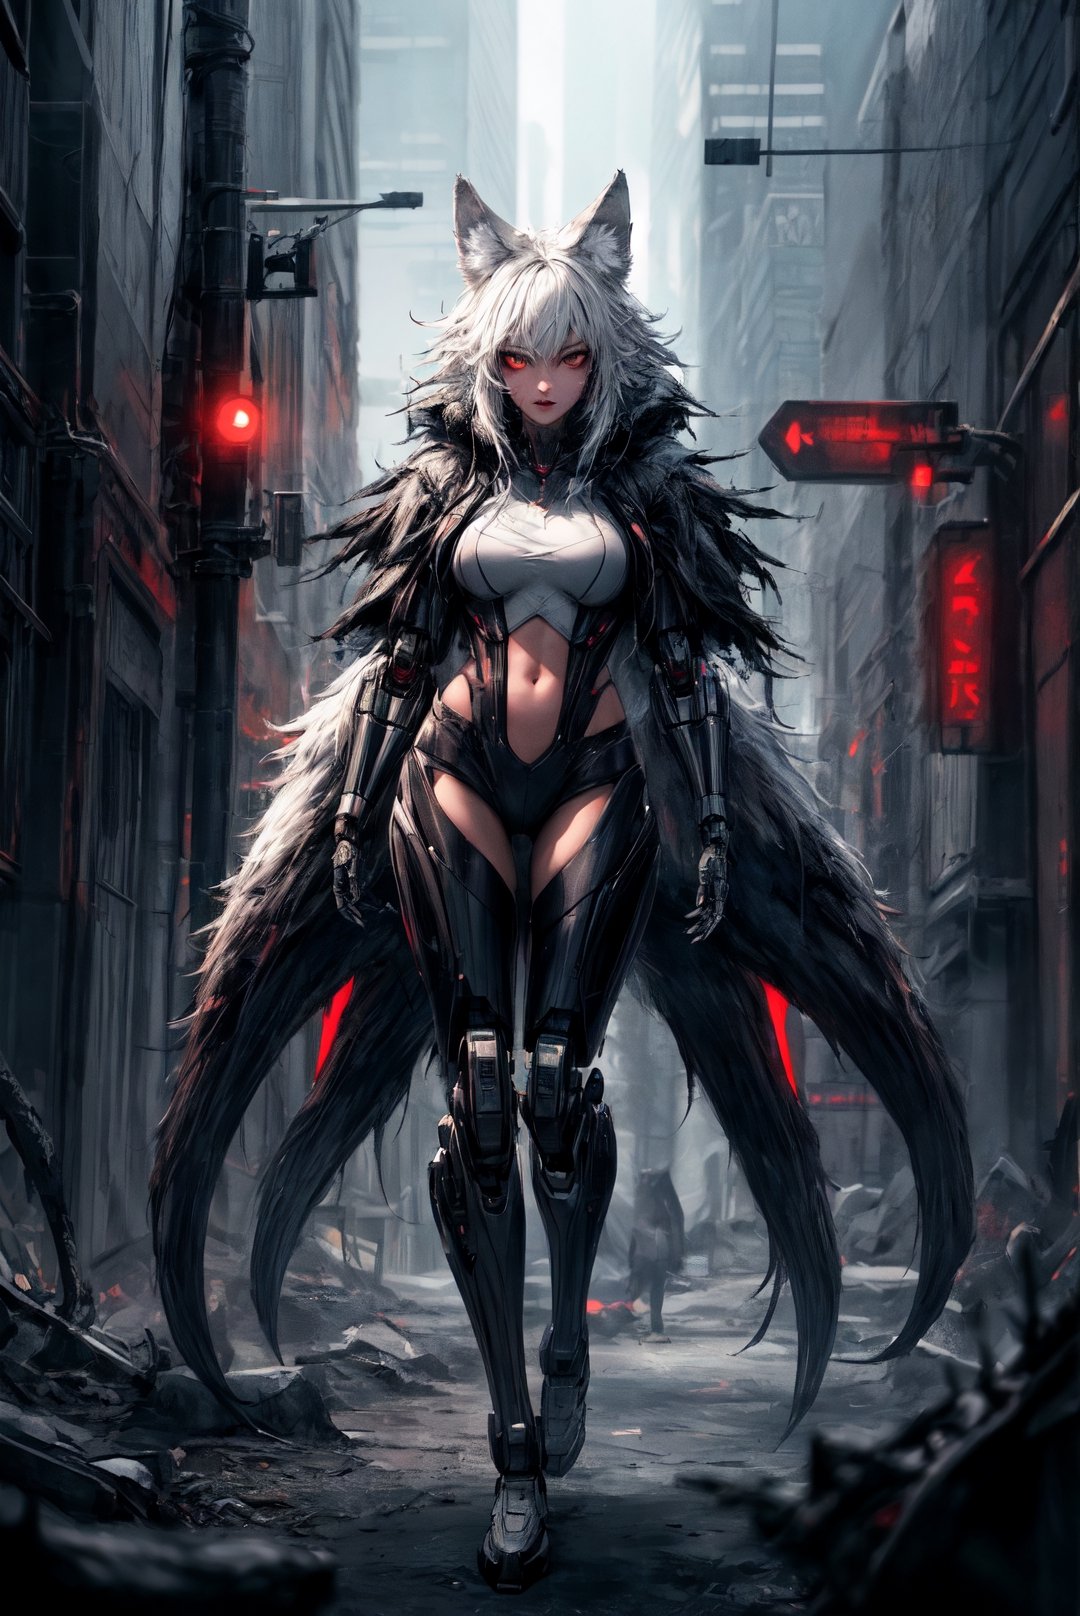 {[(8K quality image), (full body), (ultra quality image), (ultra detailed image), (perfect body), (super detailed)]}, 
demi-human woman, wolf ears, wolf tail,
wild, in the middle of the forest, gray fur, red eyes,
gray waist-length hair, claws, hunting, fangs showing, cybenetic, style cyberpunk, robot